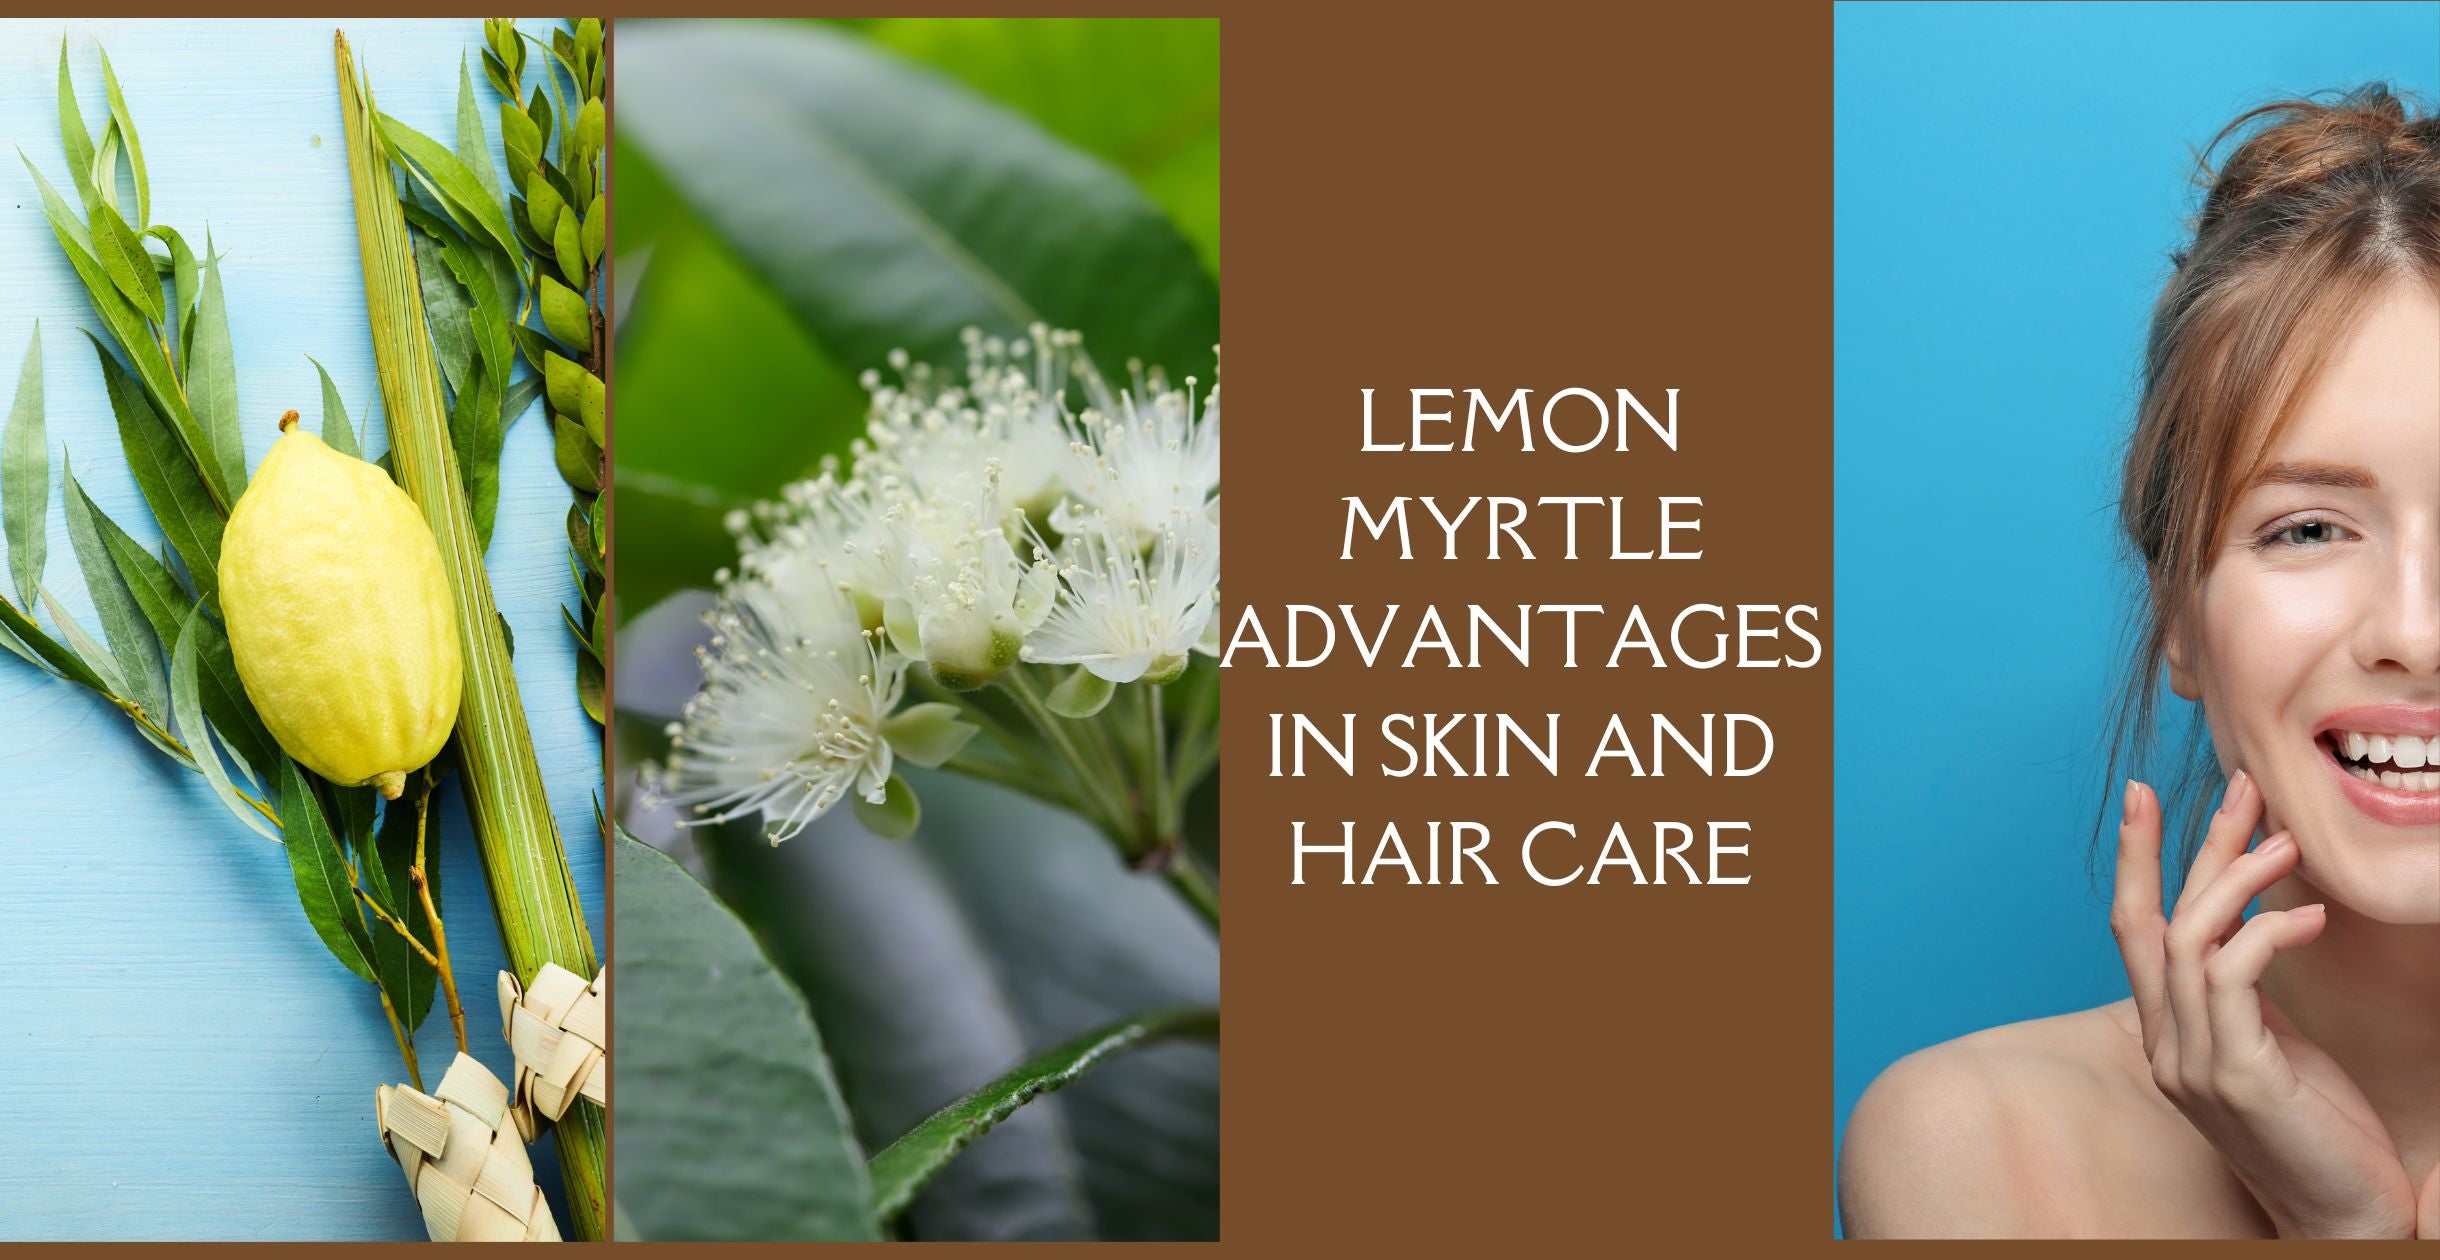 Lemon Myrtle Advantages in Skin and Hair Care